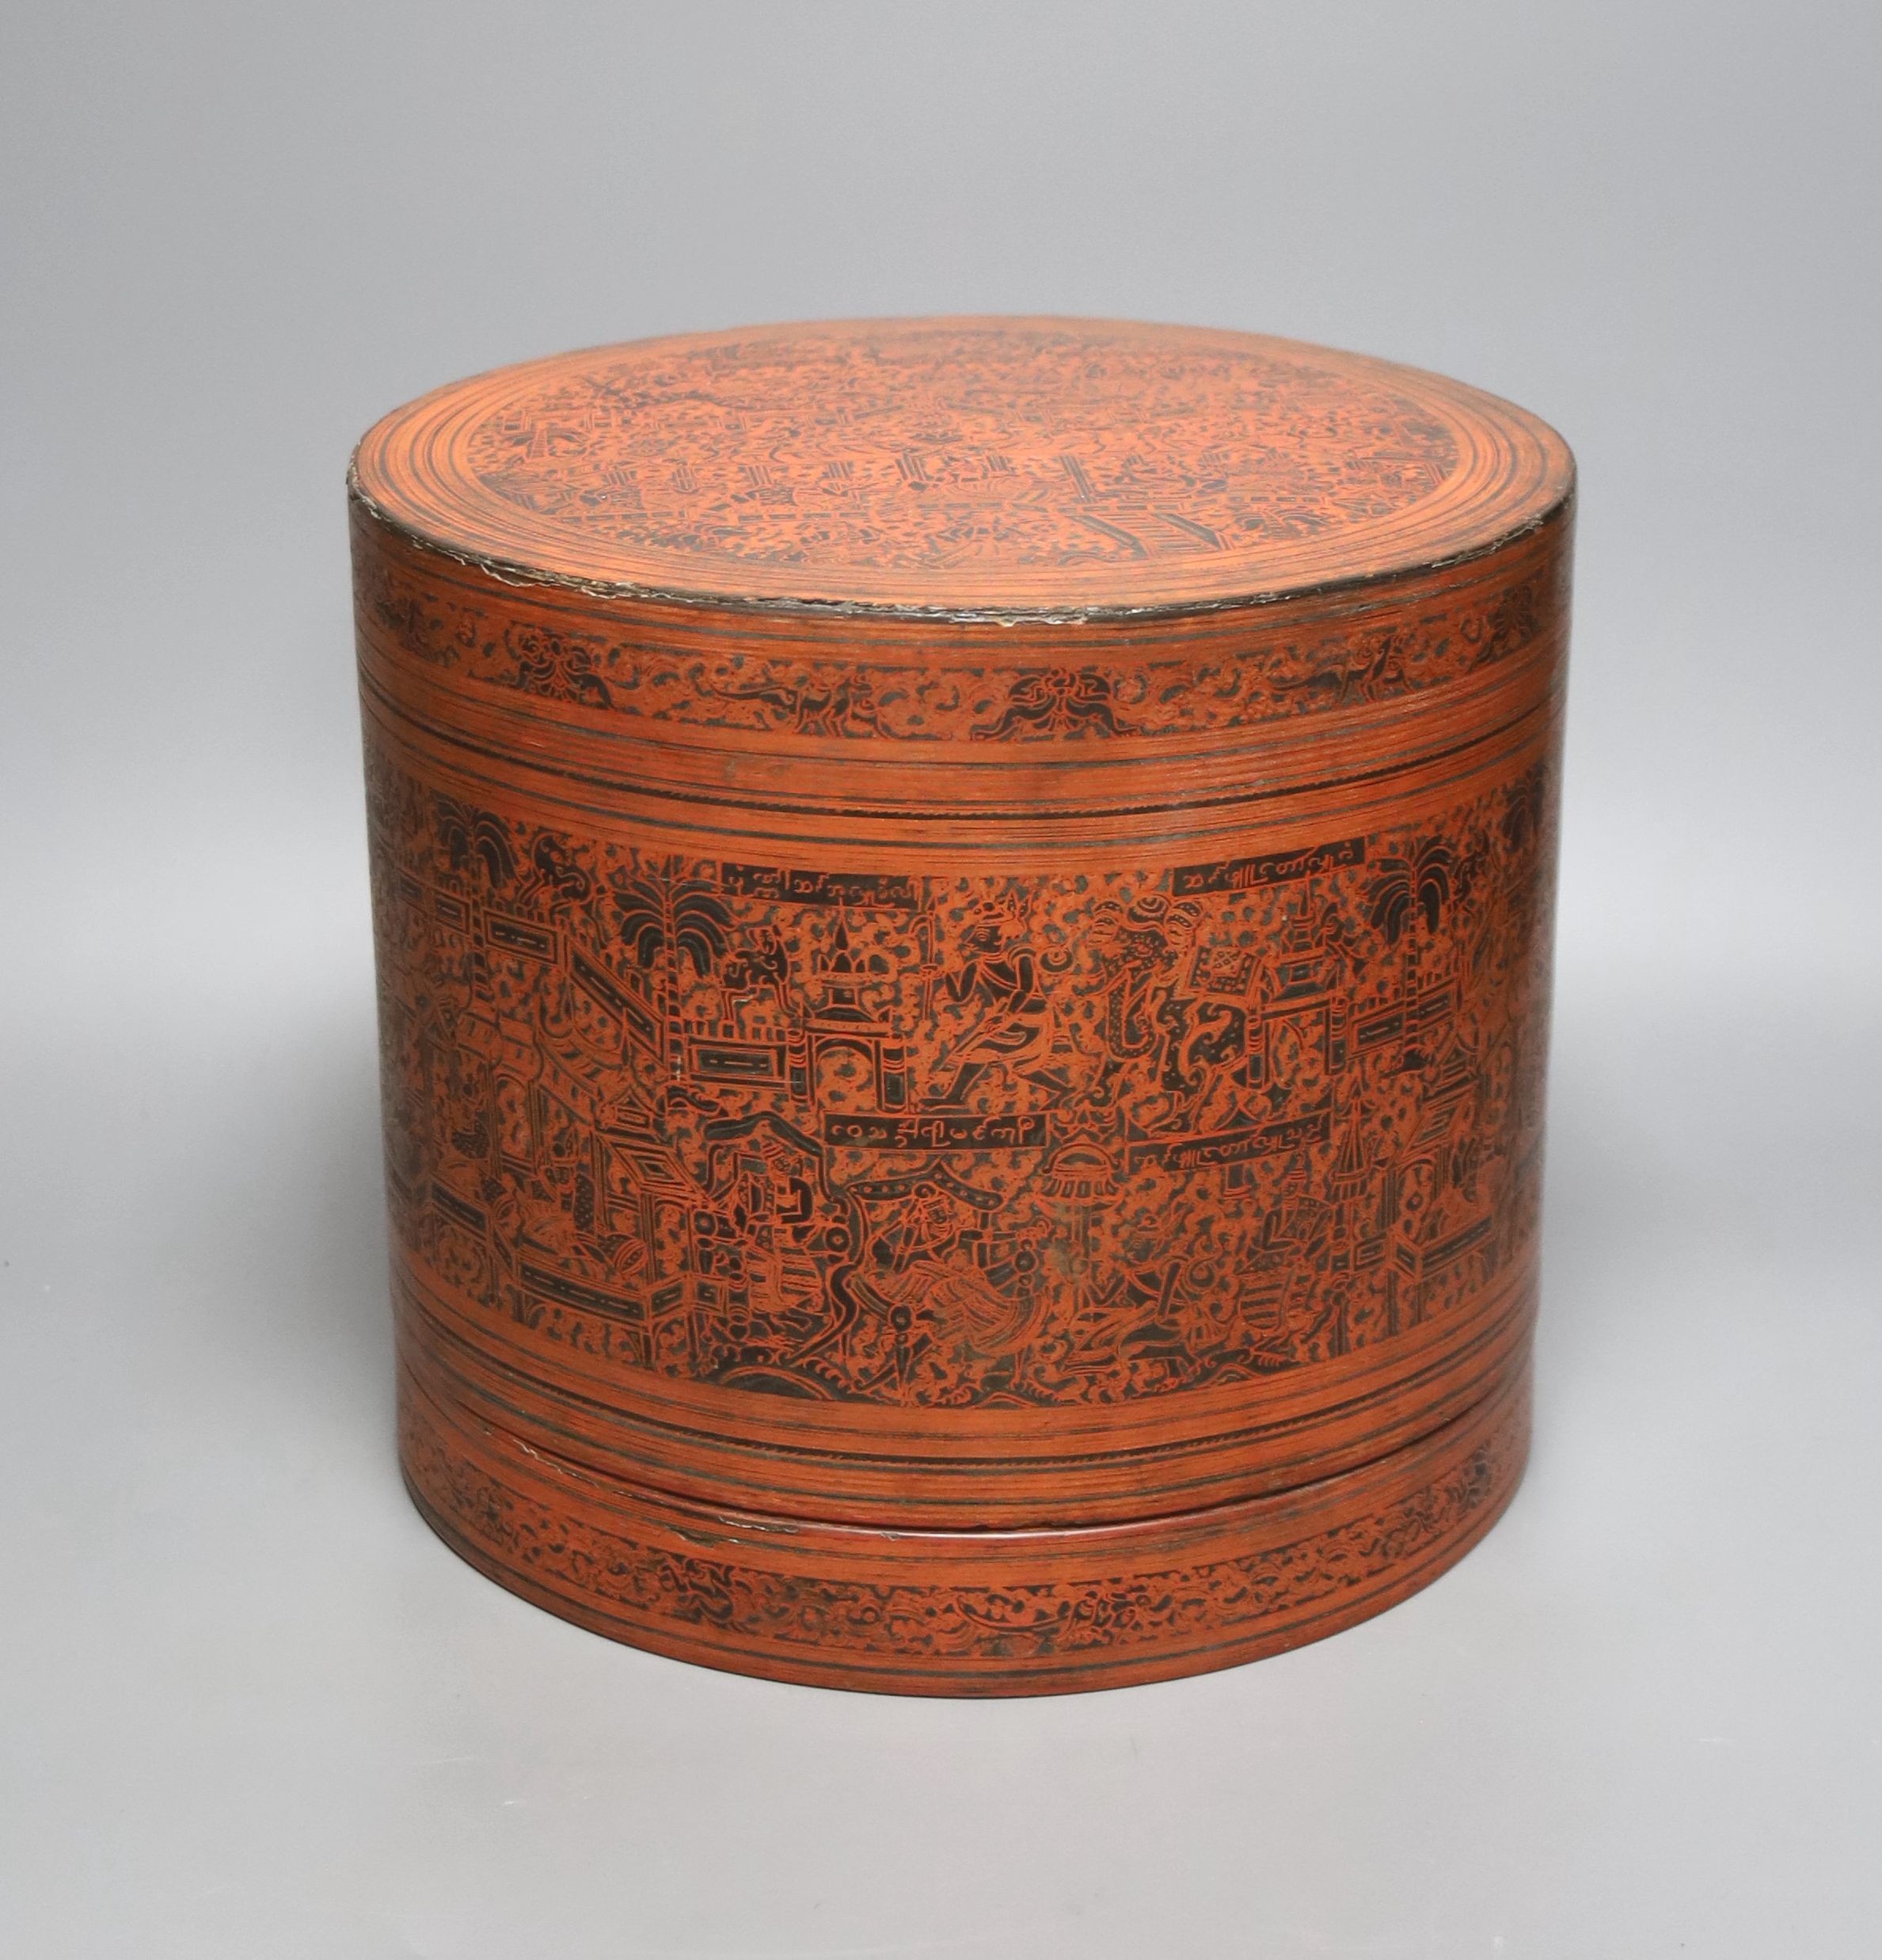 A large Burmese red and black lacquer betel box and cover with internal tray, late 19th century, 22cm